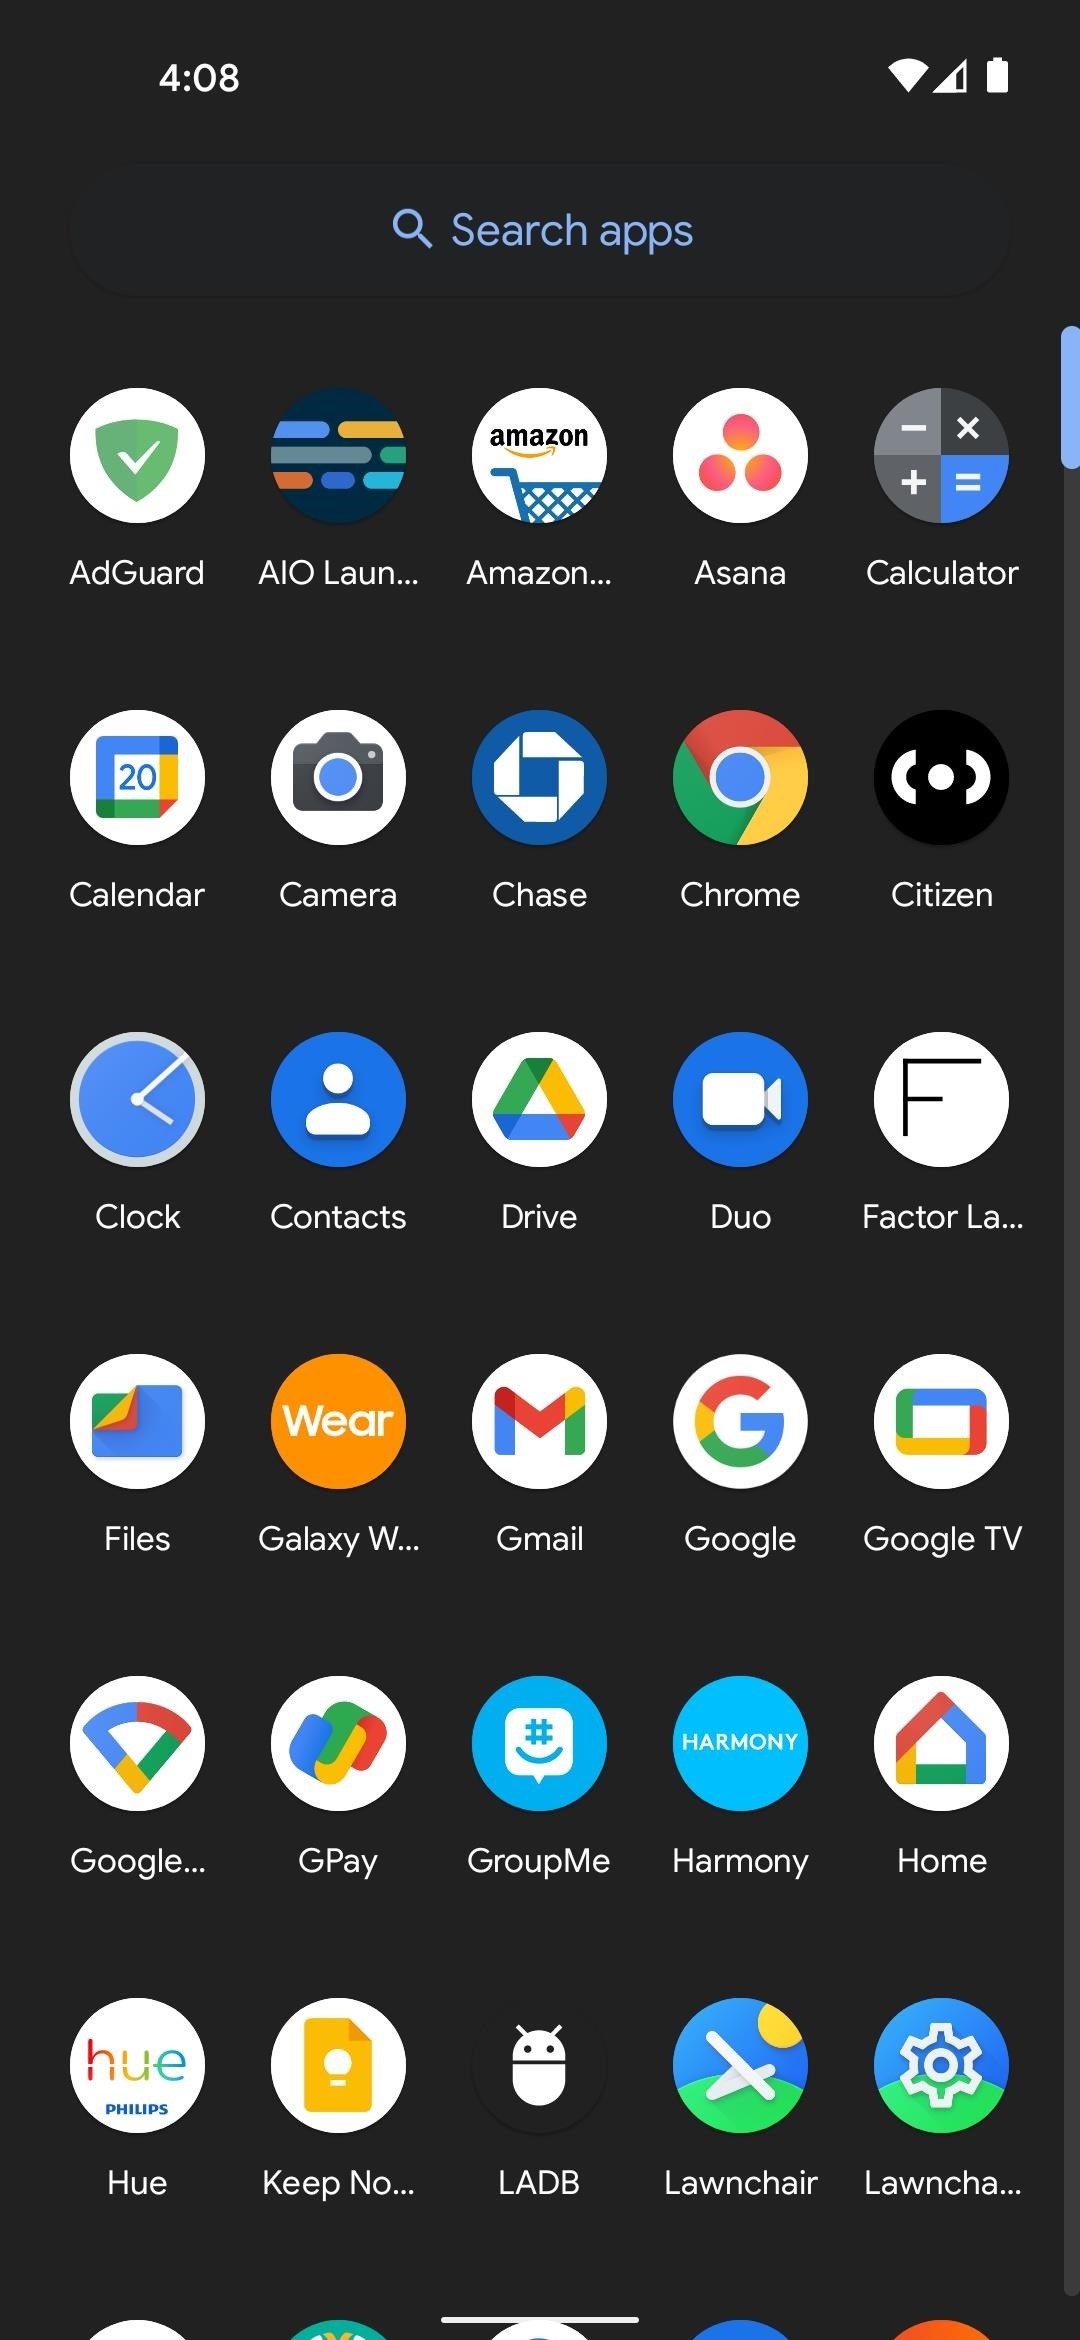 9 Fresh New Android Launchers to Replace Your Boring Home Screen (2021 Edition)